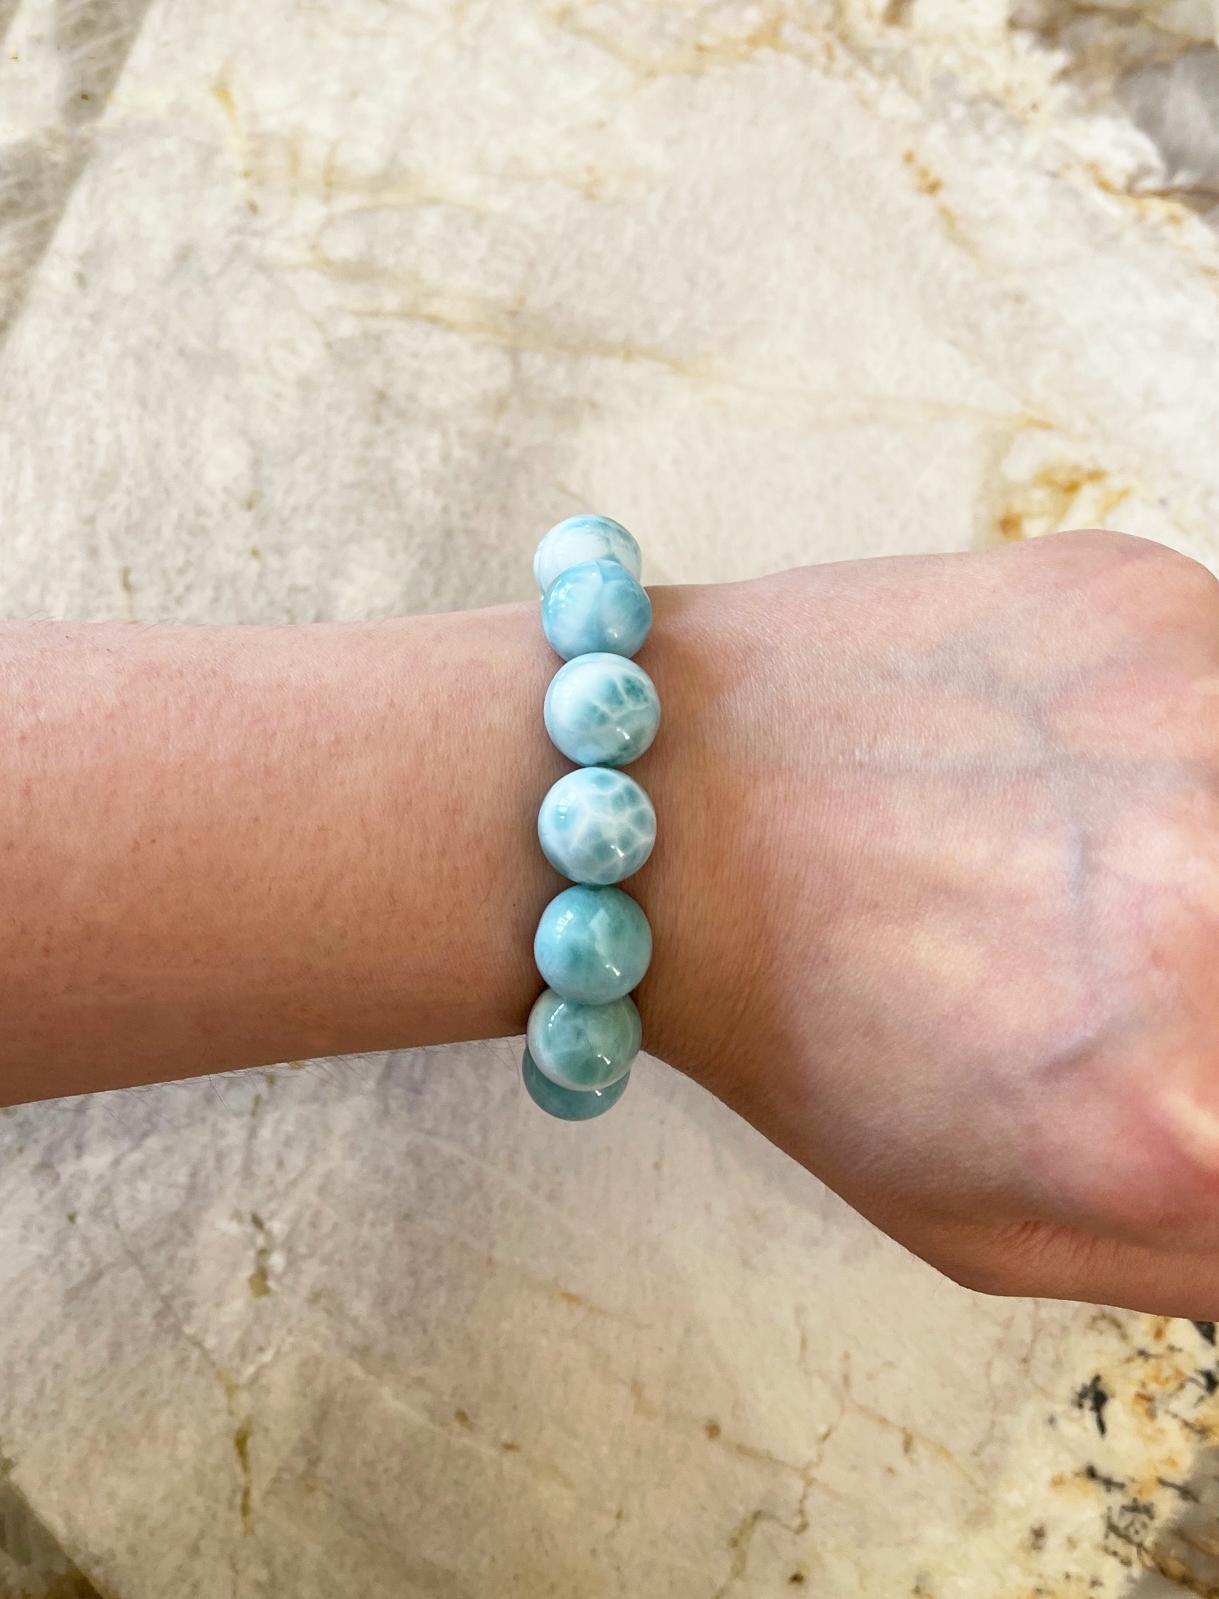 Dazzling round Dominican turtleback larimar (14mm) stretch bracelet made with natural larimar beads . Handcrafted in the USA by Rocat Designs. The larimar beads feature a gorgeous range of blue, green and white tones and the bracelet measures